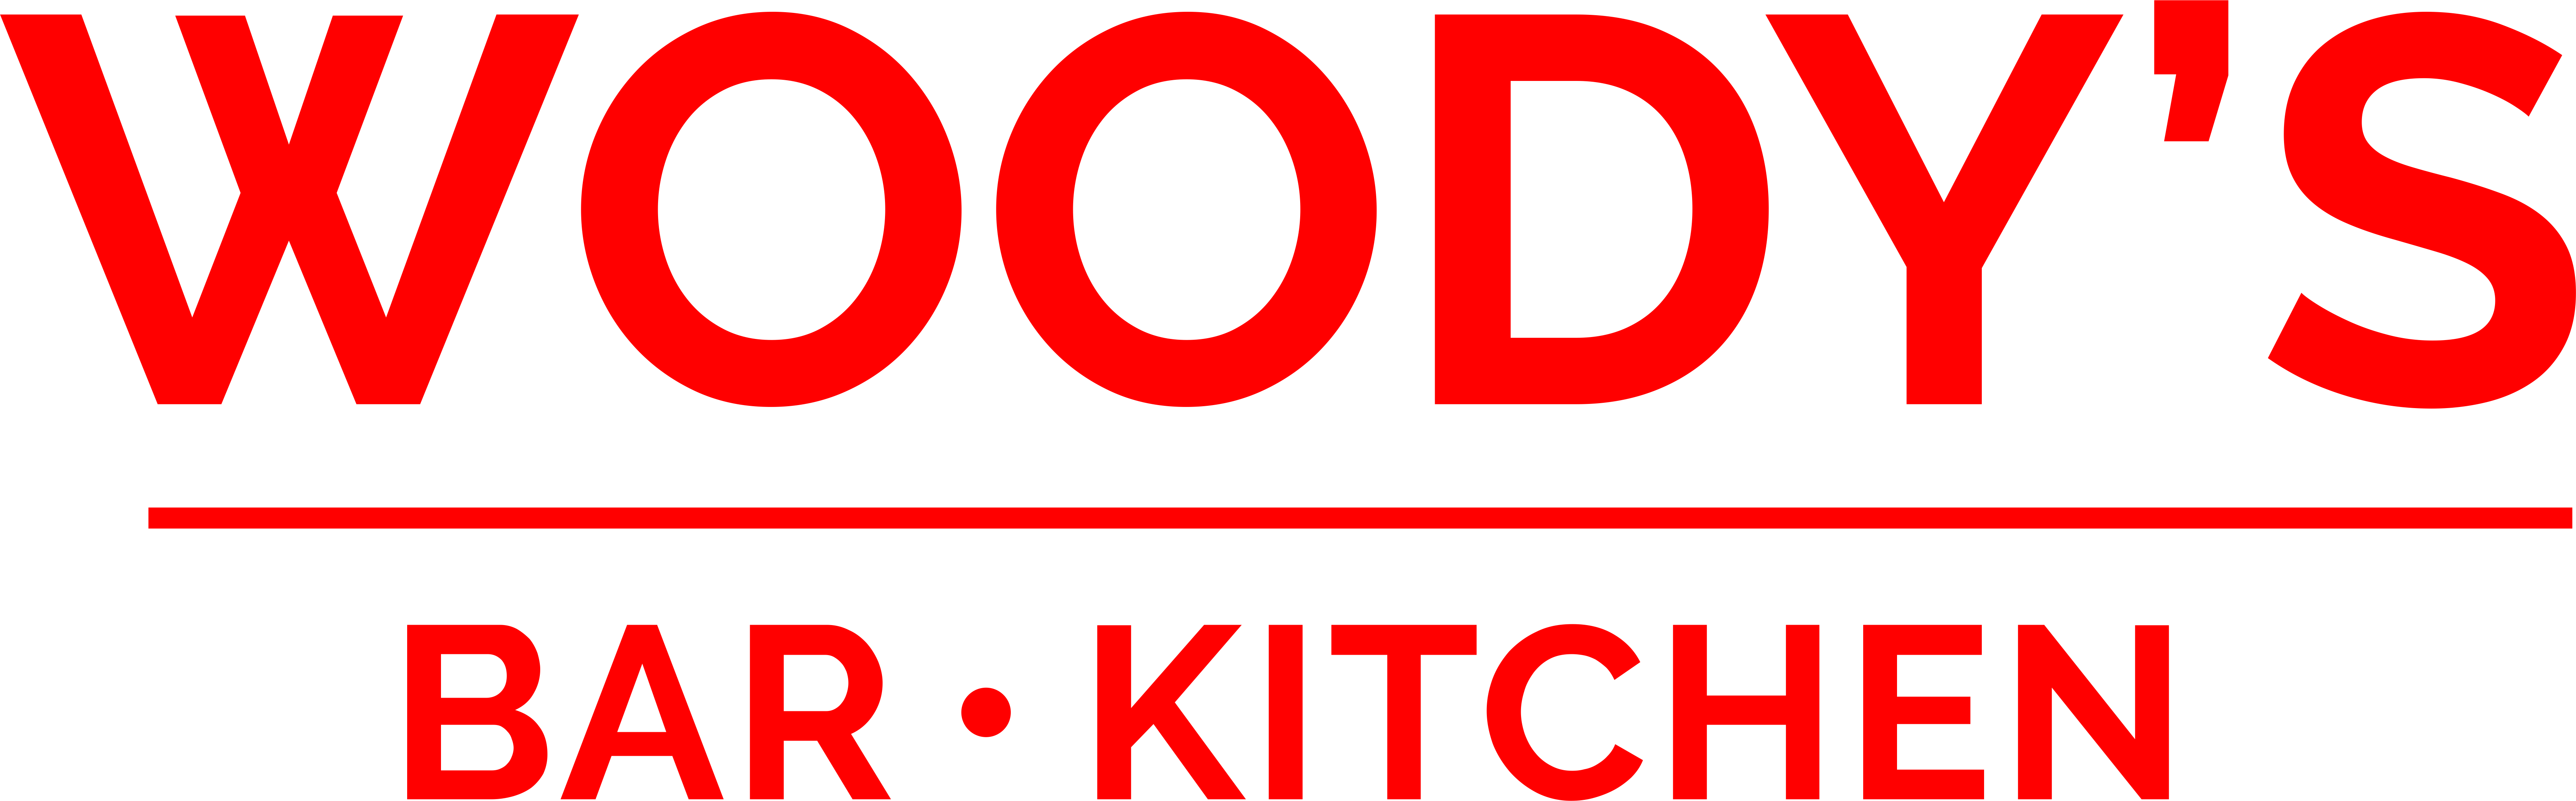 Business logo of WOODY'S BAR & KITCHEN